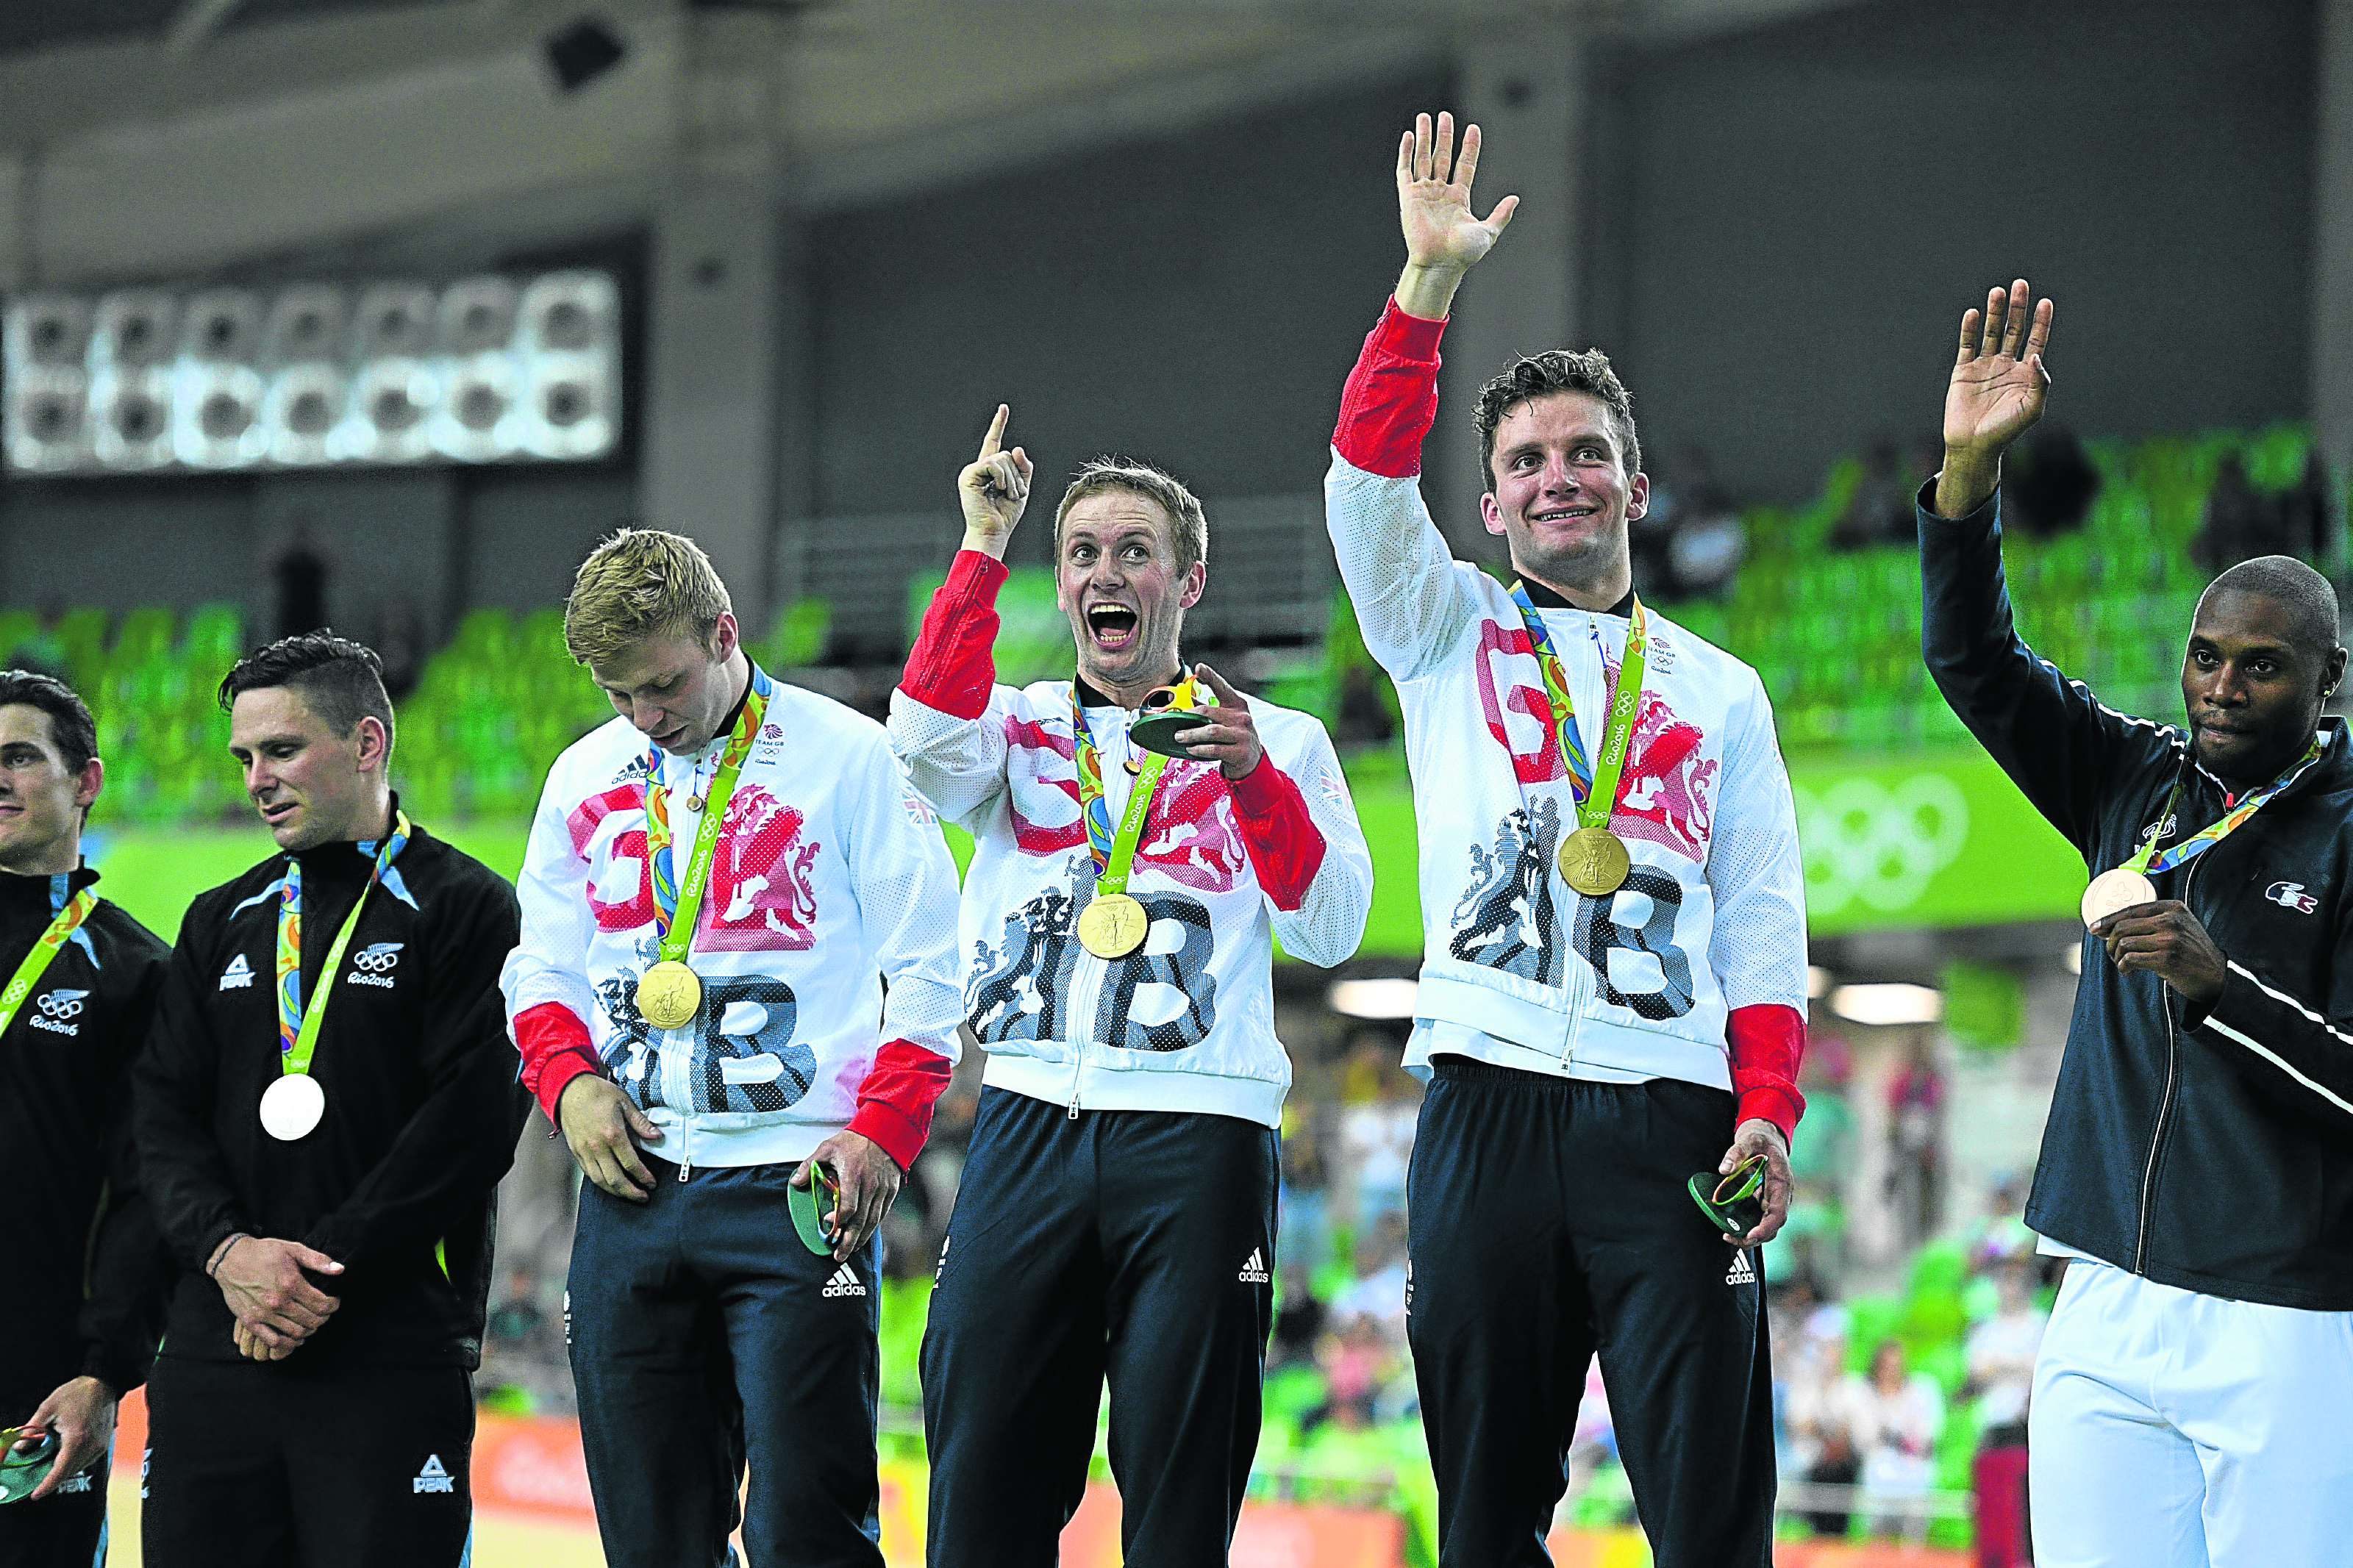 Gold medallists Philip Hindes, Jason Kenny and Callum Skinner of Great Britain celebrate after the Men's Team Sprint Track Cycling Finals (Photo by David Ramos/Getty Images)